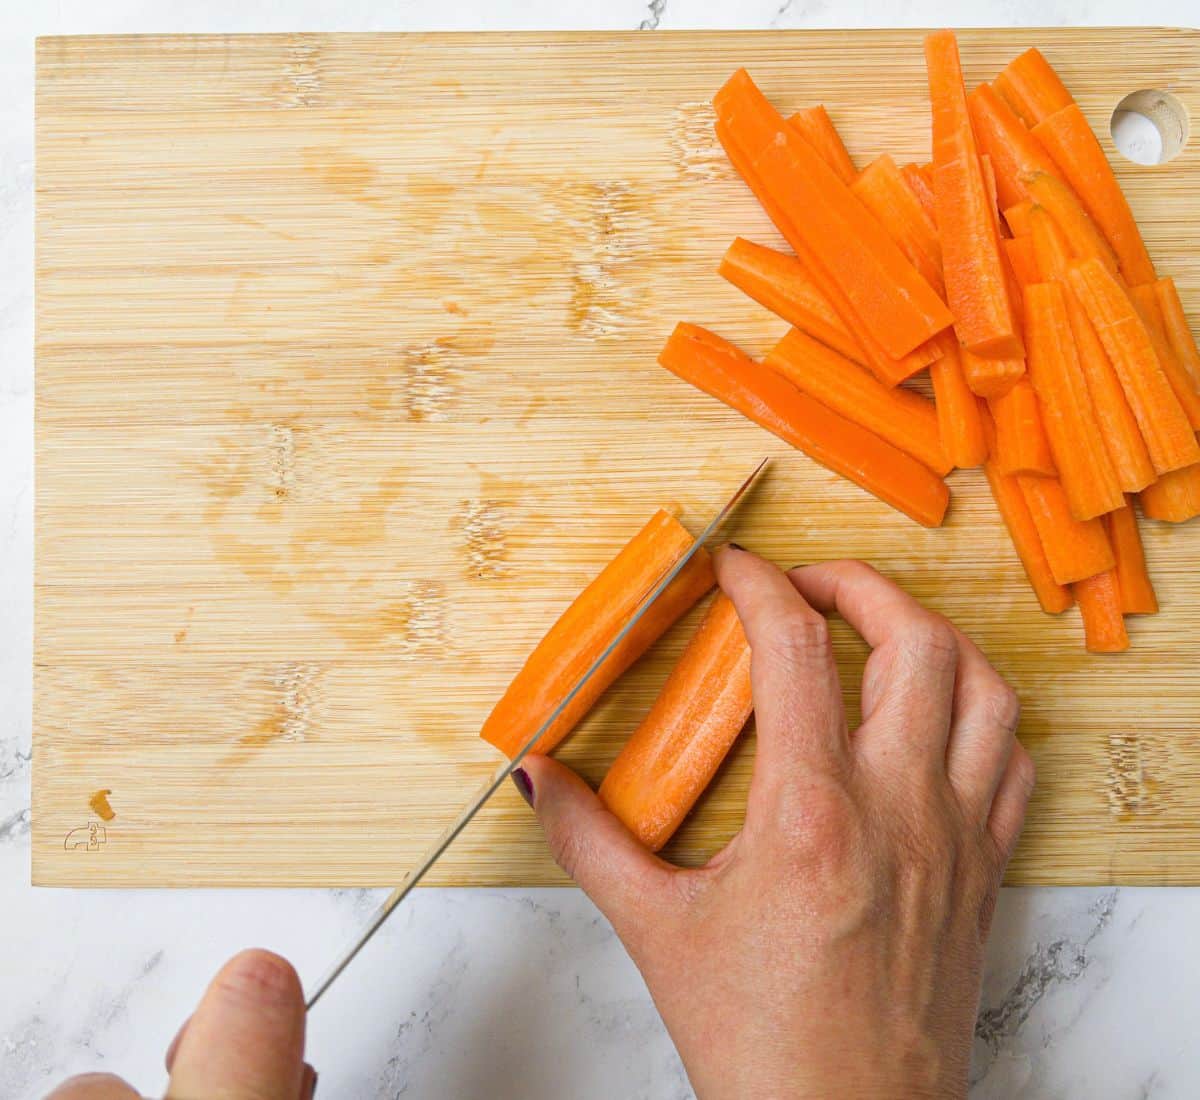 Carrots being chopped into sticks on a chopping board.